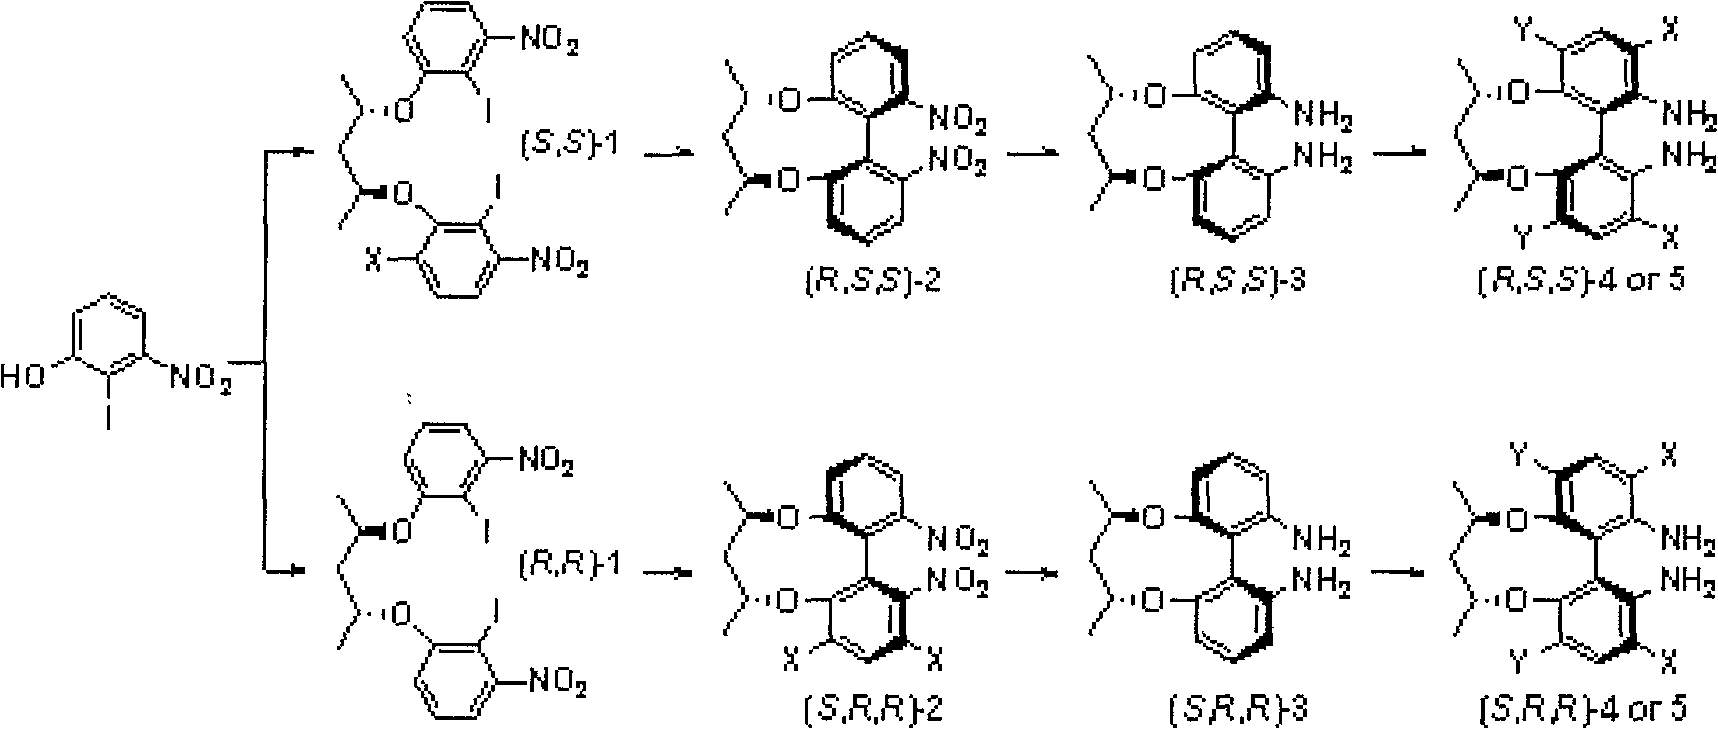 Axial chirality diamine compound induced by central chirality and synthetic method